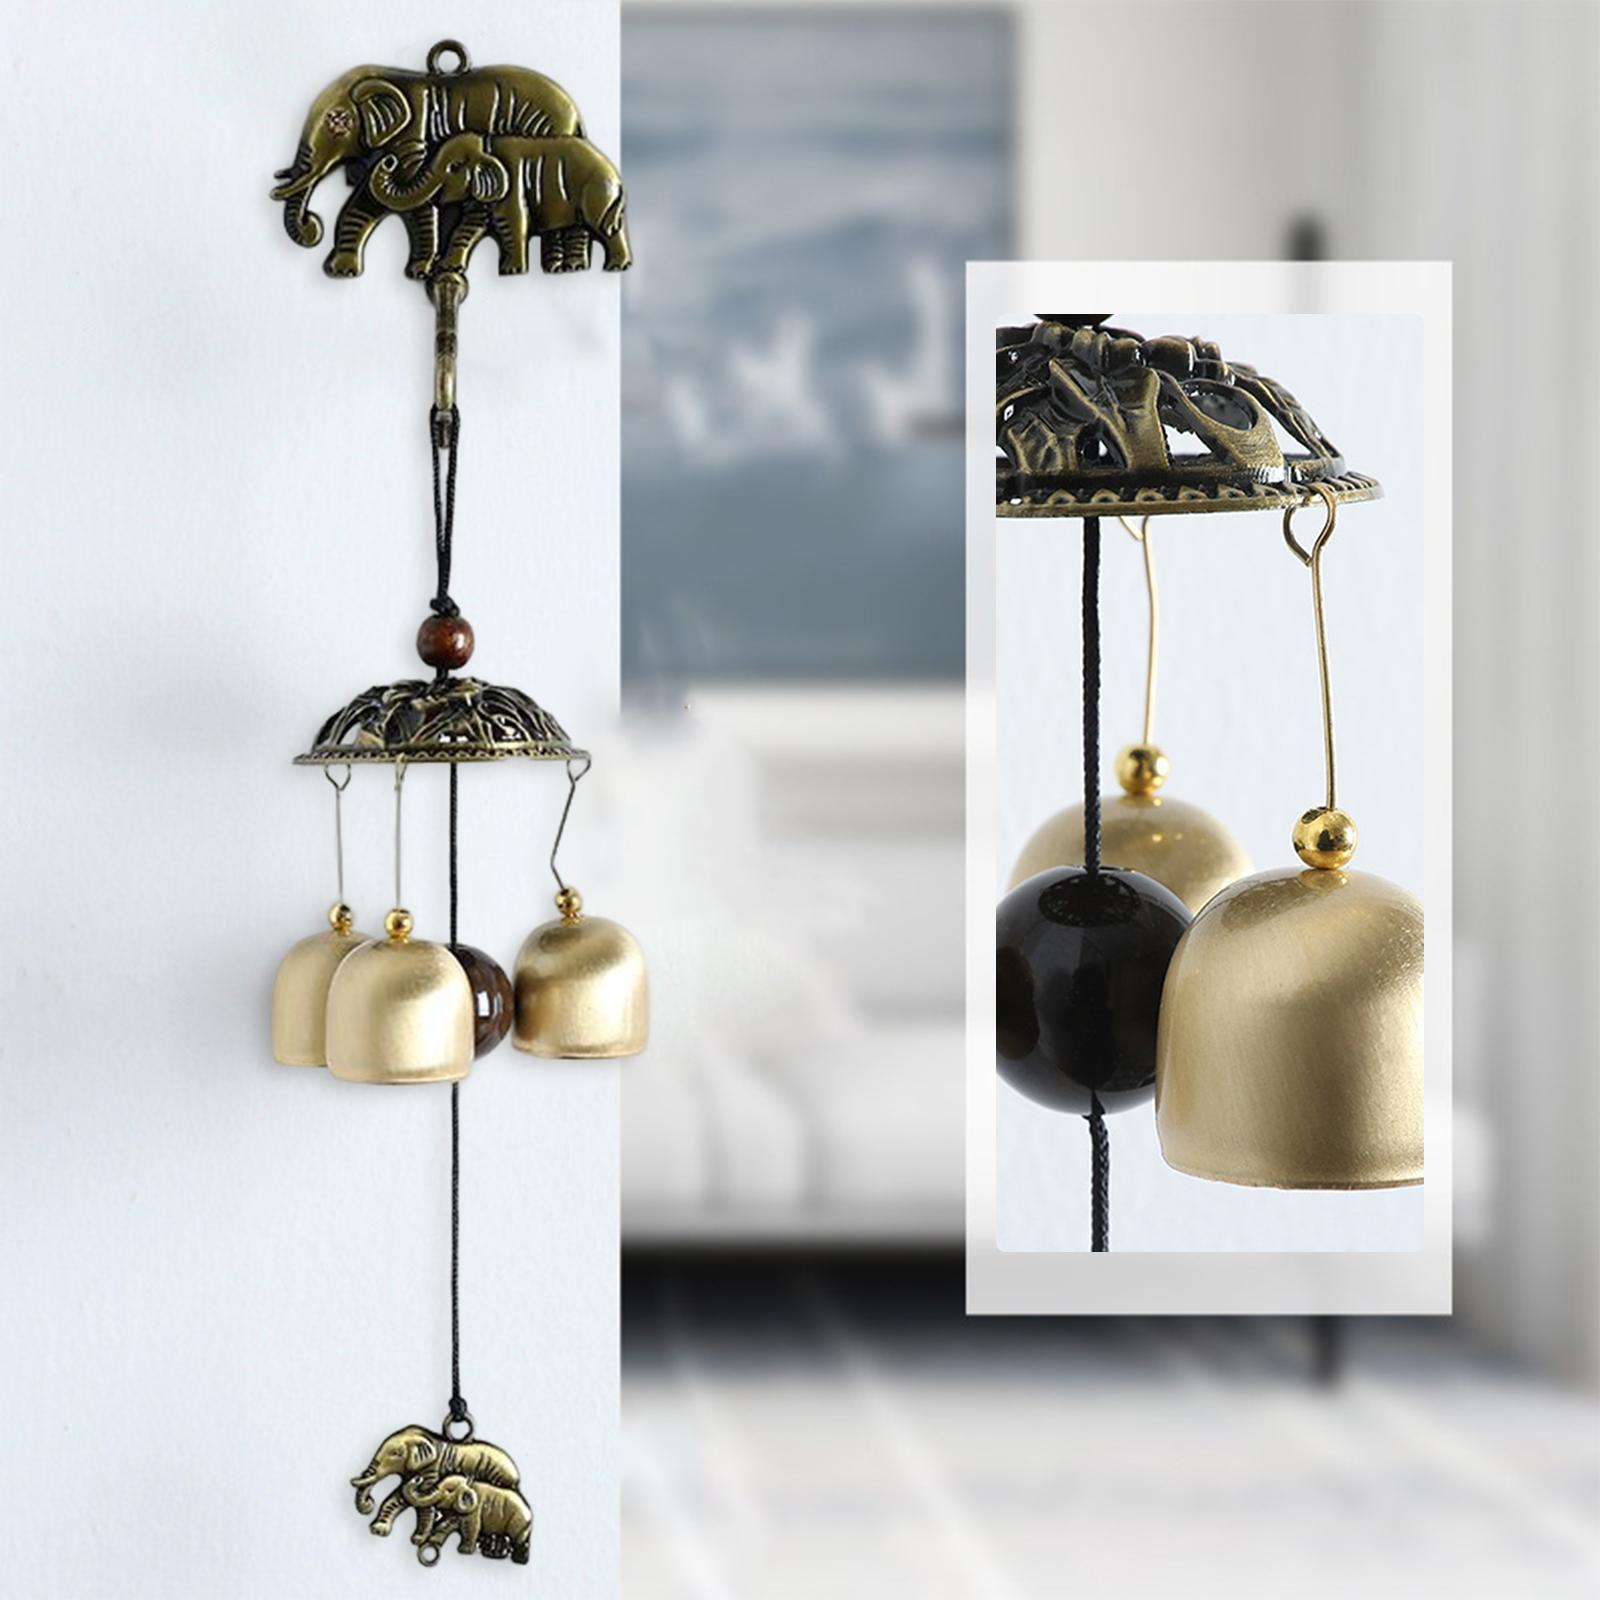 Retro Wind Chimes Wall Hanging Manual Door Bell for Room Garden Decoration DoubleElephant Style